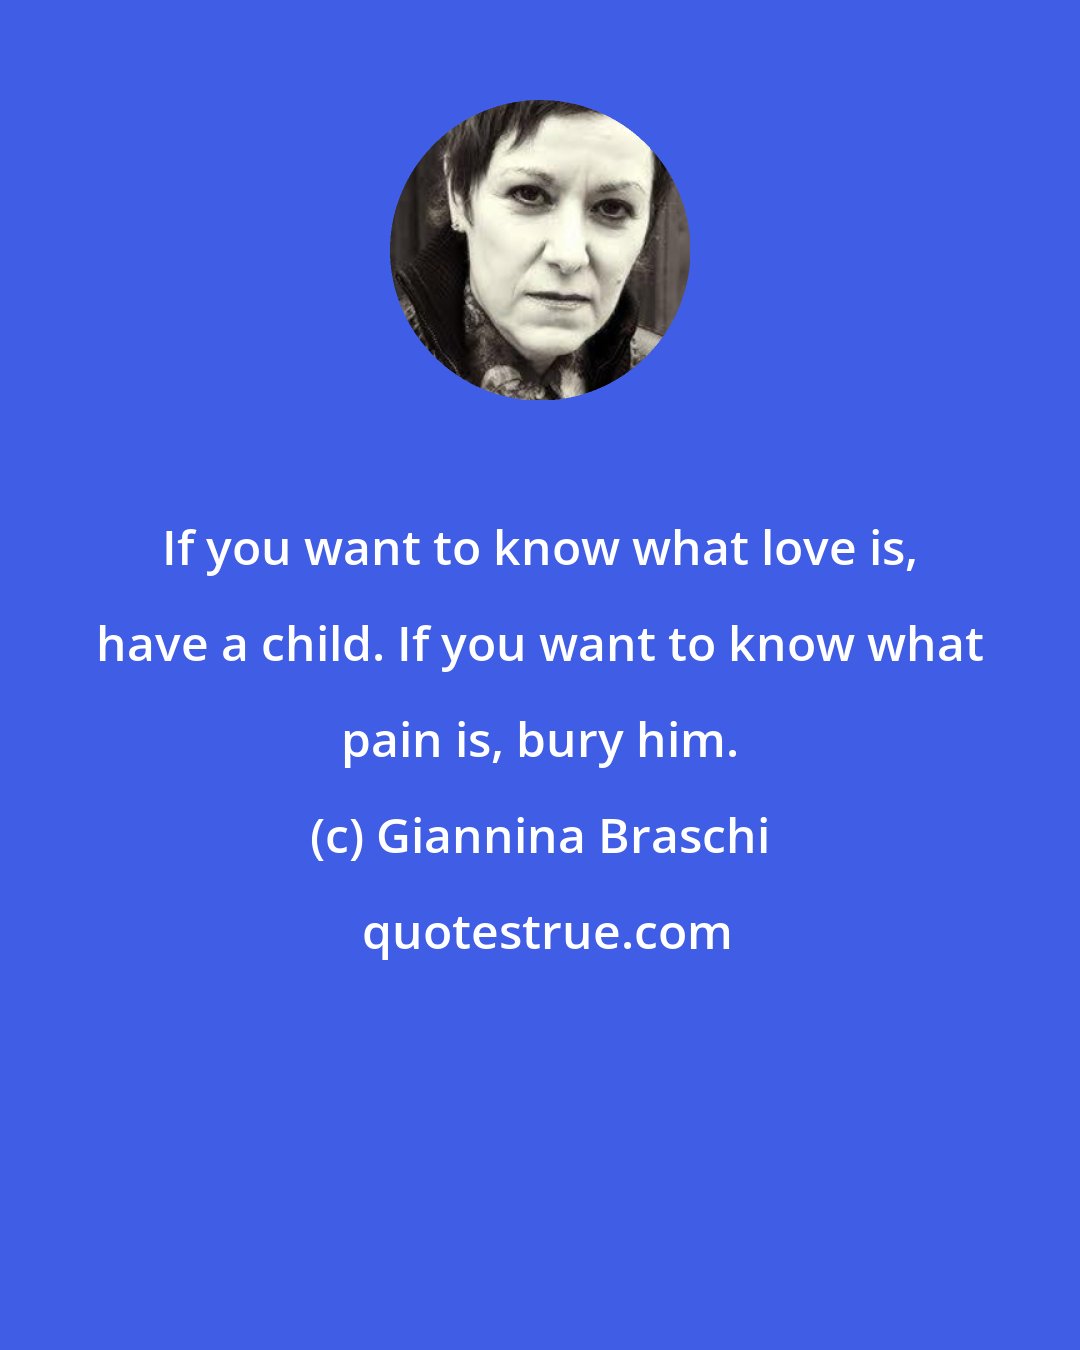 Giannina Braschi: If you want to know what love is, have a child. If you want to know what pain is, bury him.